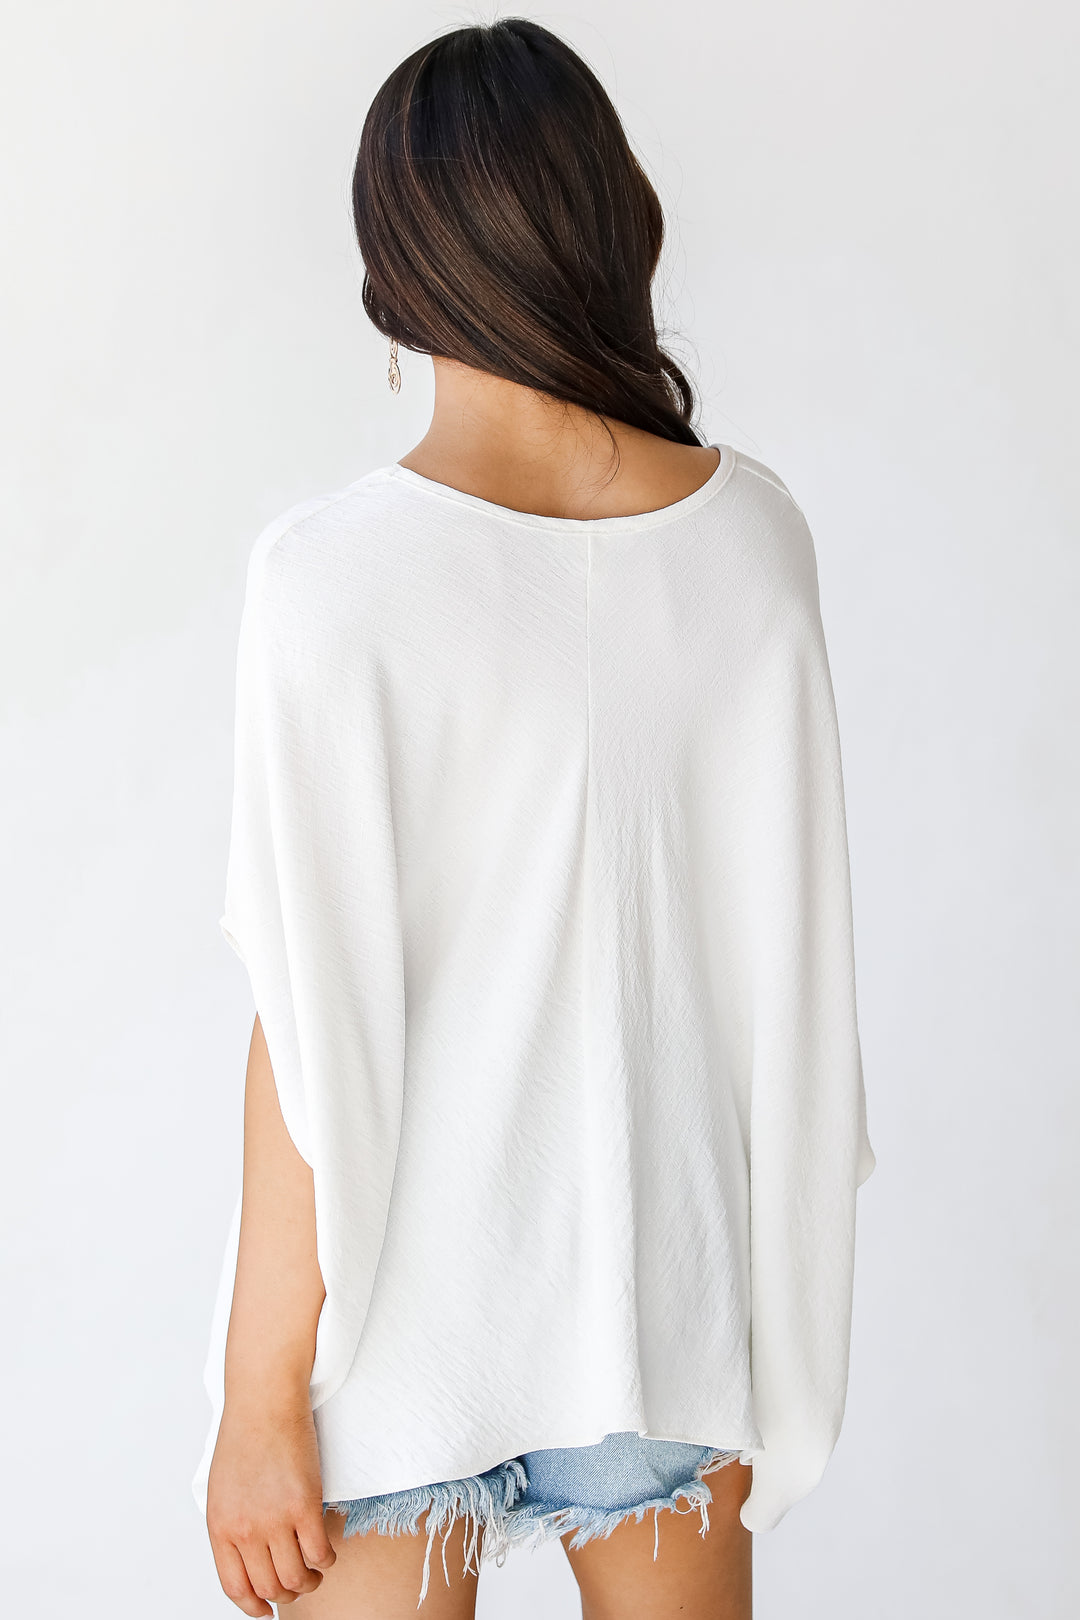 Oversized Blouse in white back view